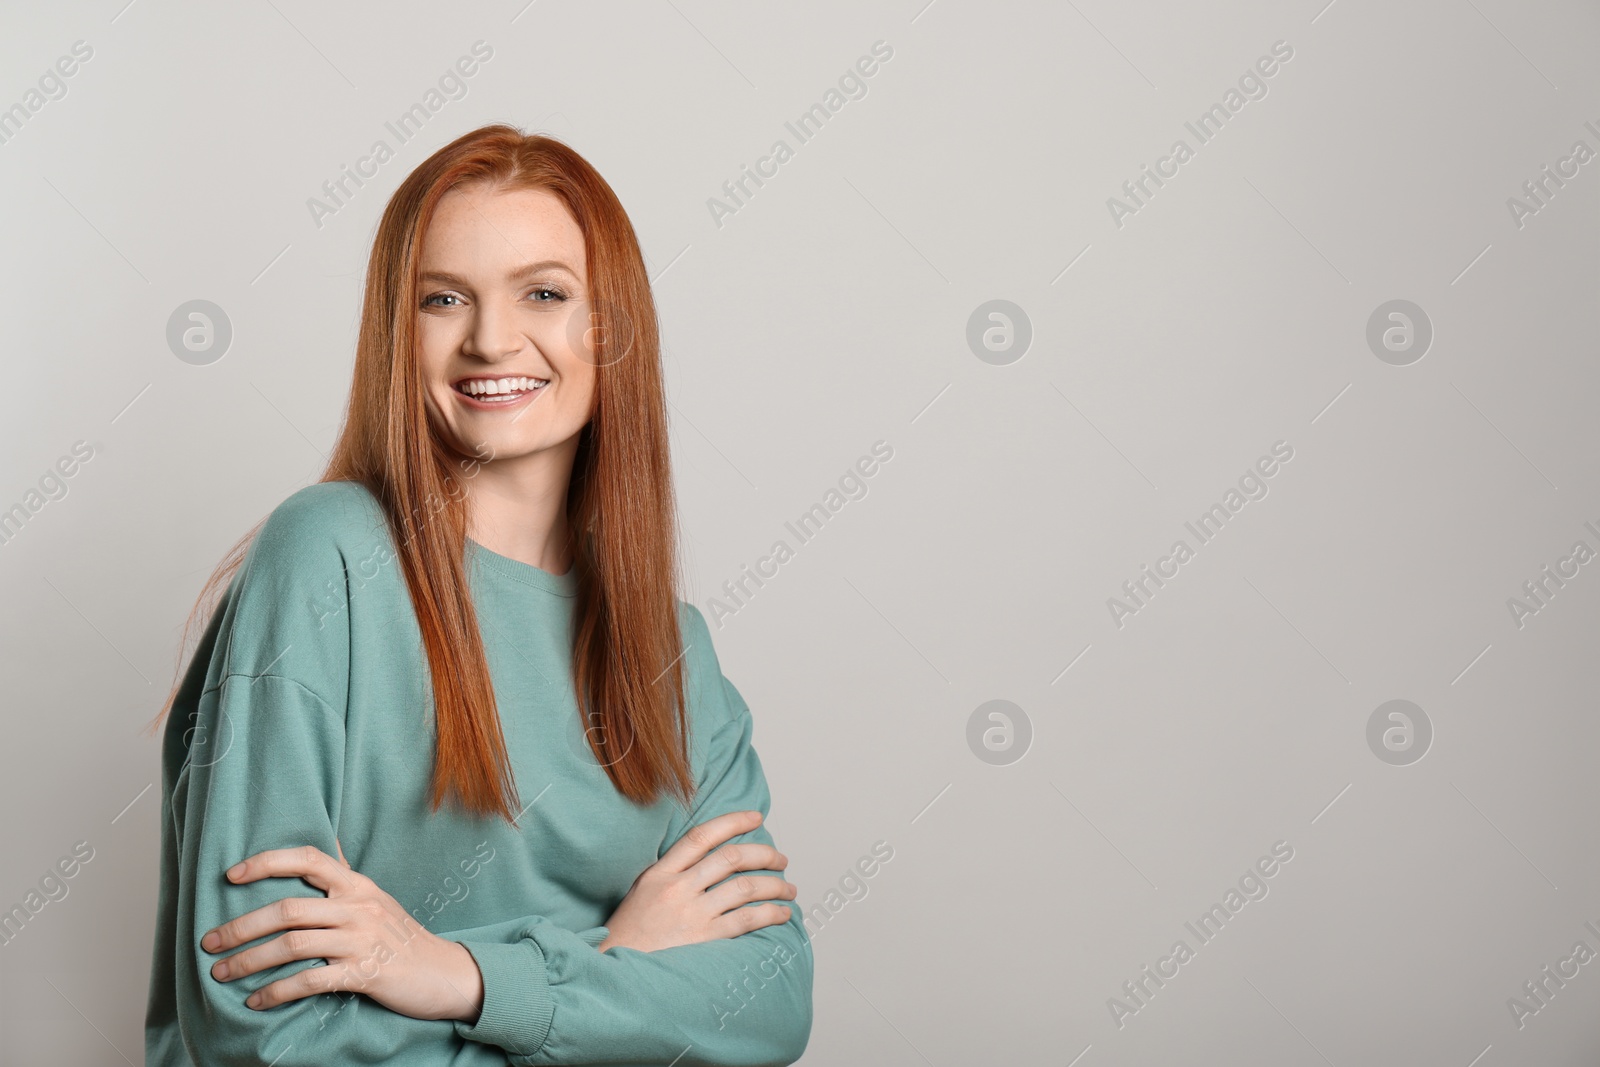 Photo of Candid portrait of happy young woman with charming smile and gorgeous red hair on light background, space for text